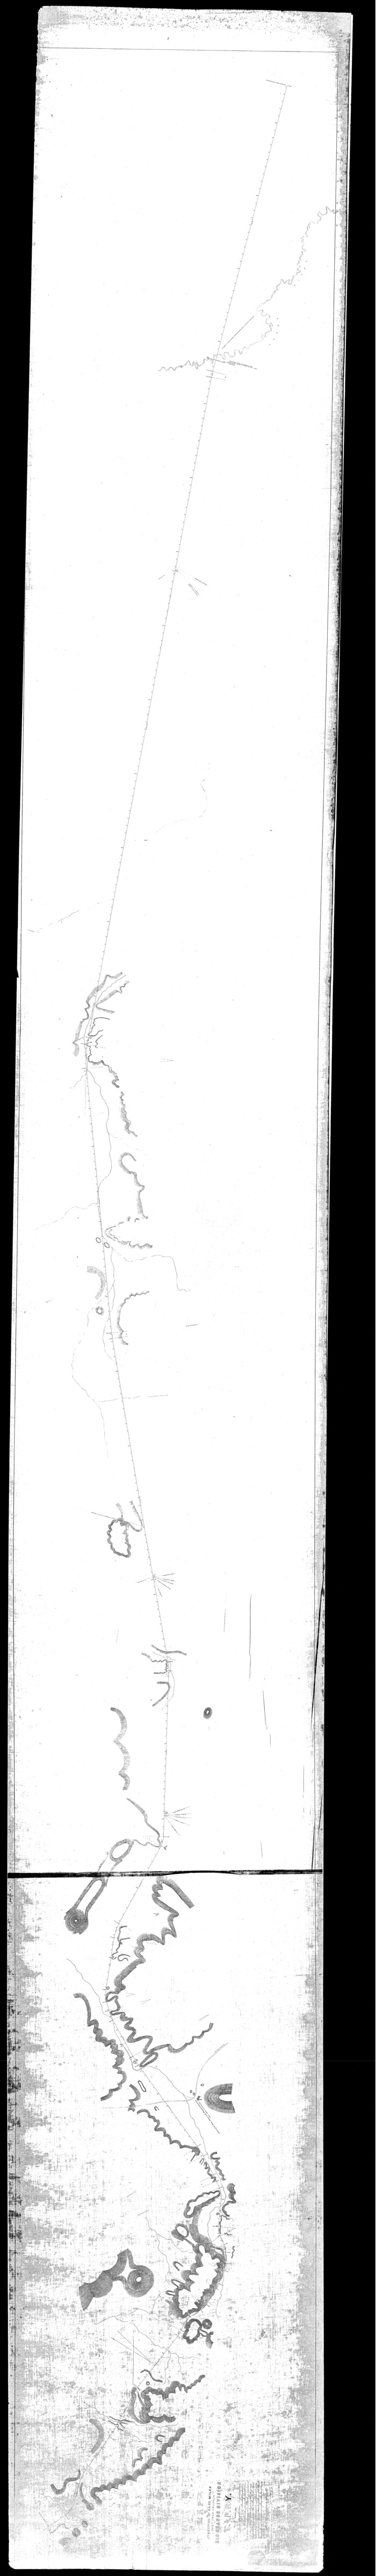 64639, Map of 4th Section of 54.68 Miles East from Franklin, Rio Grande Division T. and P. Ry., General Map Collection